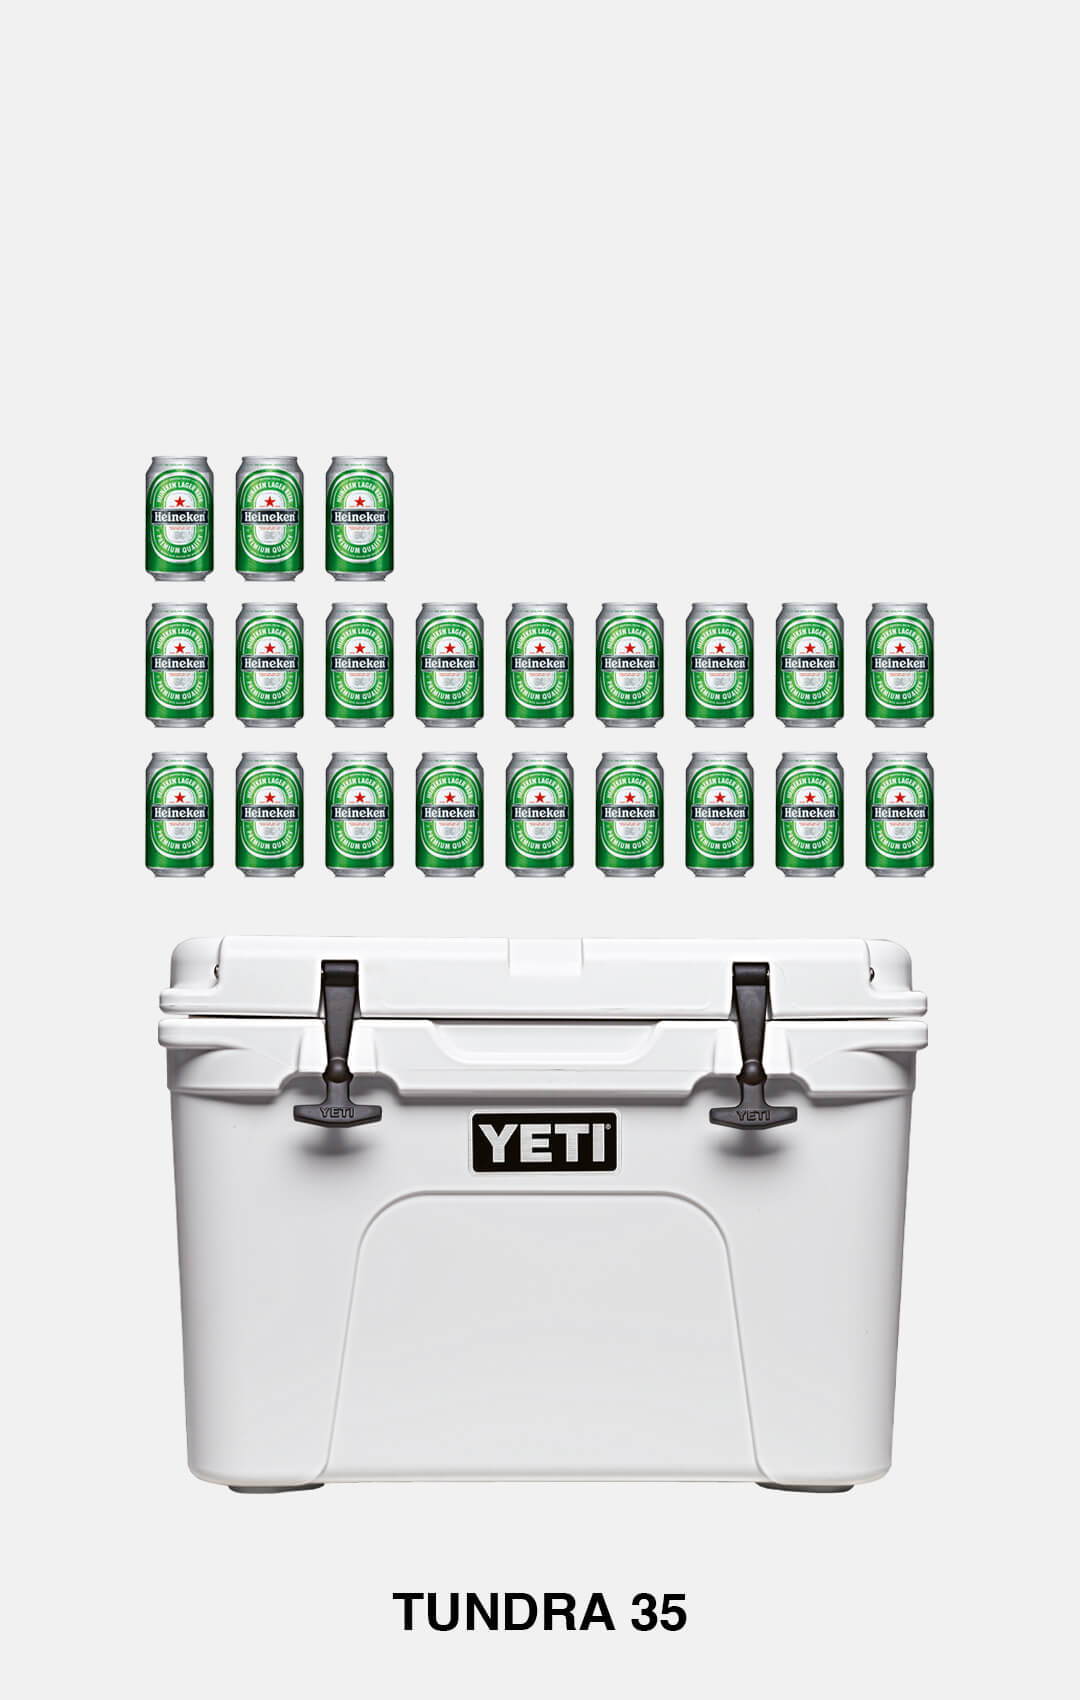 A Brief History of Yeti Coolers - Men's Journal